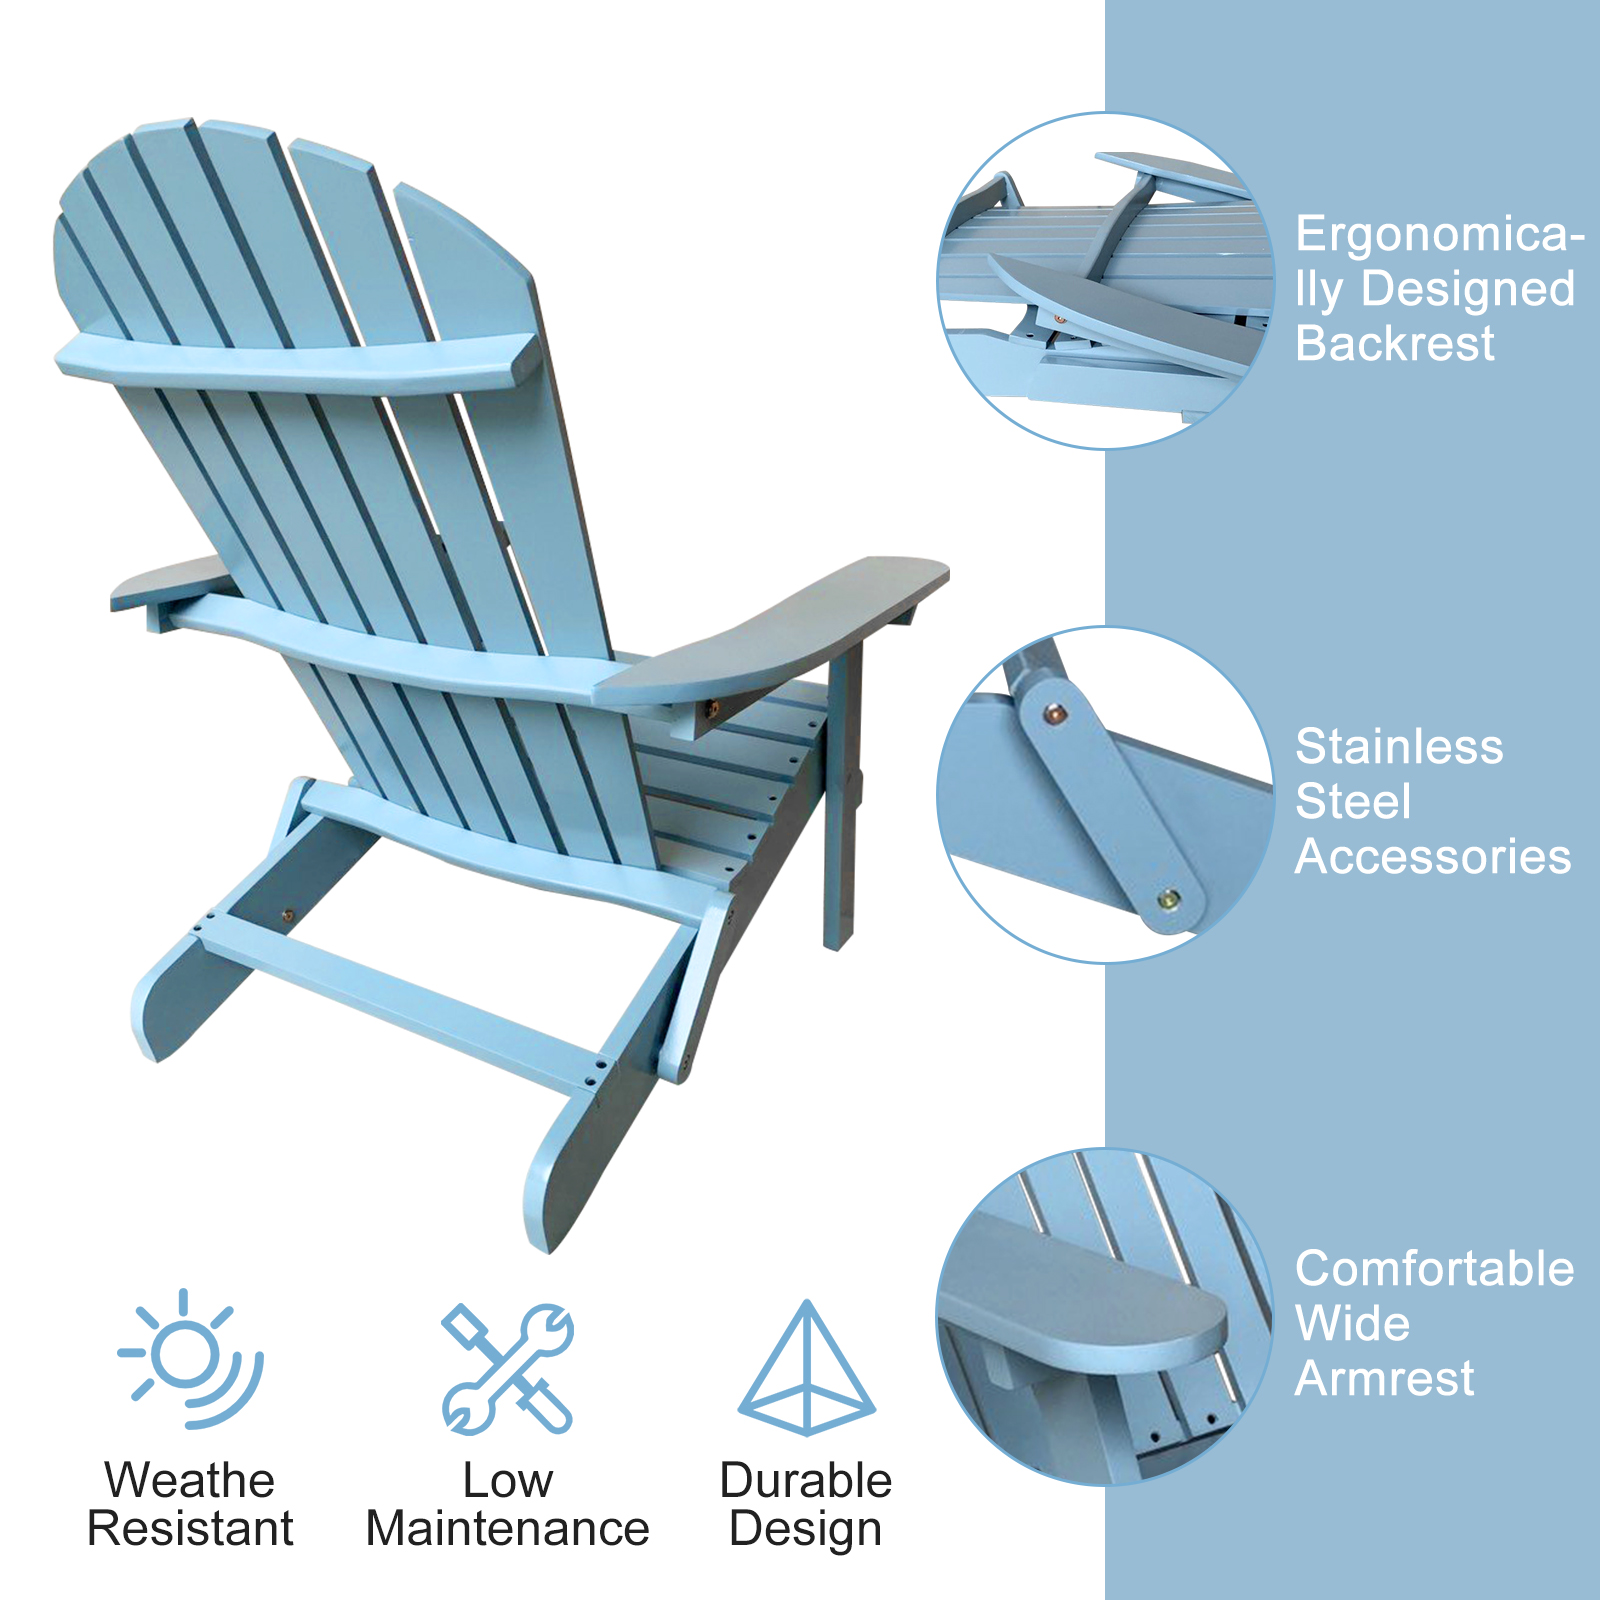 Adirondack Chair Outdoor Folding Wooden Adirondack Lounger Chair Patio Chair Lawn Chair for Adults, Turquoise, Blue - image 4 of 7